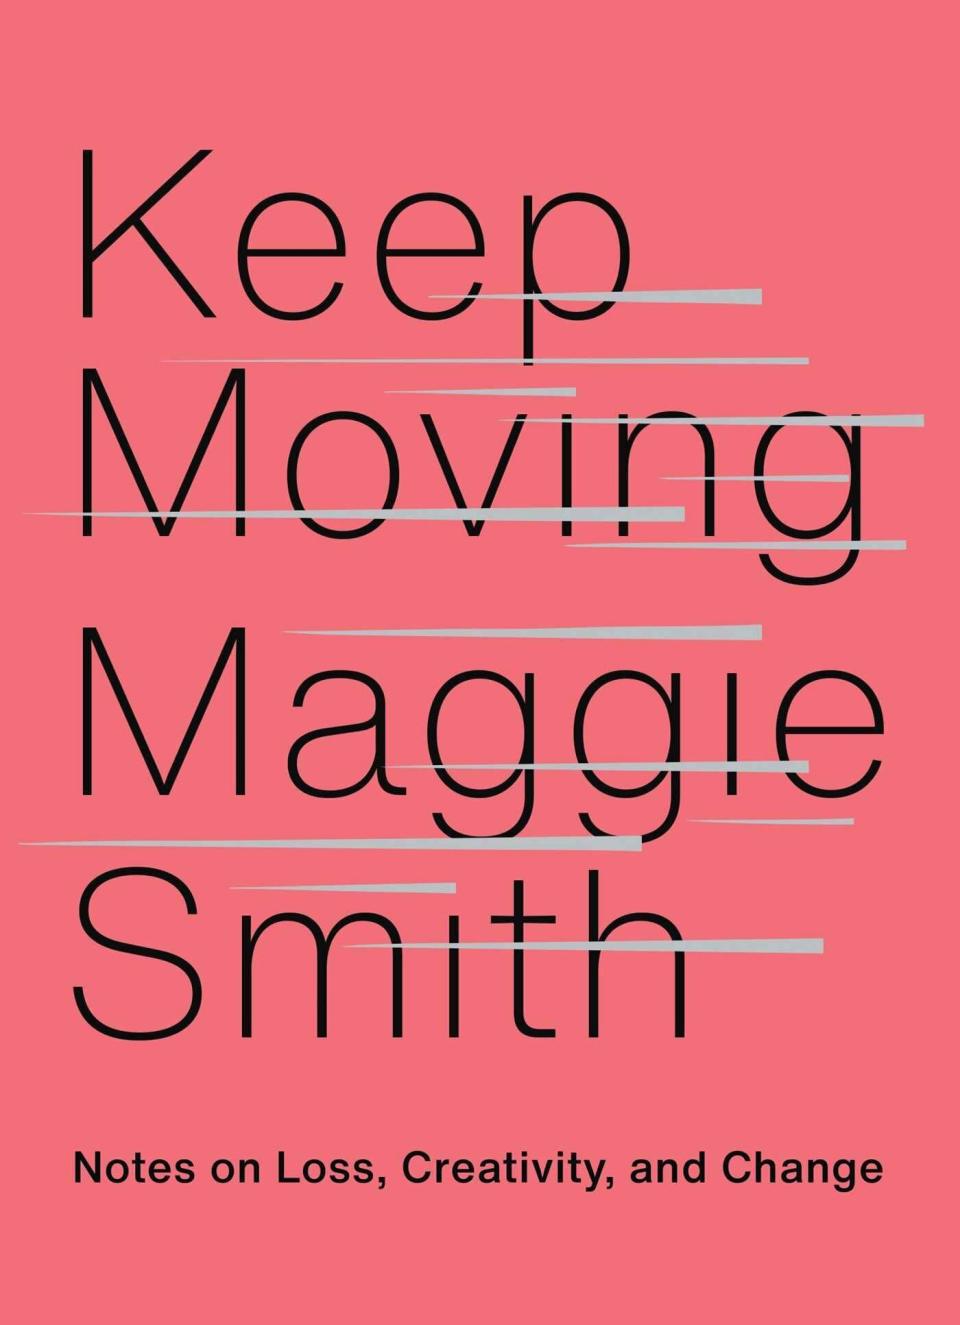 &ldquo;Keep Moving&rdquo; by Maggie Smith is an excellent COVID-19-era pick me up. In a series of essays and quotes, Smith writes about the beauty of transformation and new beginnings after loss. Atria/One Signal Publishers calls it the perfect read &ldquo;for anyone who has gone through a difficult time and is wondering: <i>What comes next?&rdquo; </i>Read more about it on <a href="https://www.goodreads.com/book/show/52053133-keep-moving" target="_blank" rel="noopener noreferrer">Goodreads﻿</a> and grab a copy on <a href="https://amzn.to/3l5vIK8" target="_blank" rel="noopener noreferrer">Amazon</a> or <a href="https://fave.co/2SyvpLT" target="_blank" rel="noopener noreferrer">Bookshop</a>.<br /><br /><i>Expected release date: October 6</i>